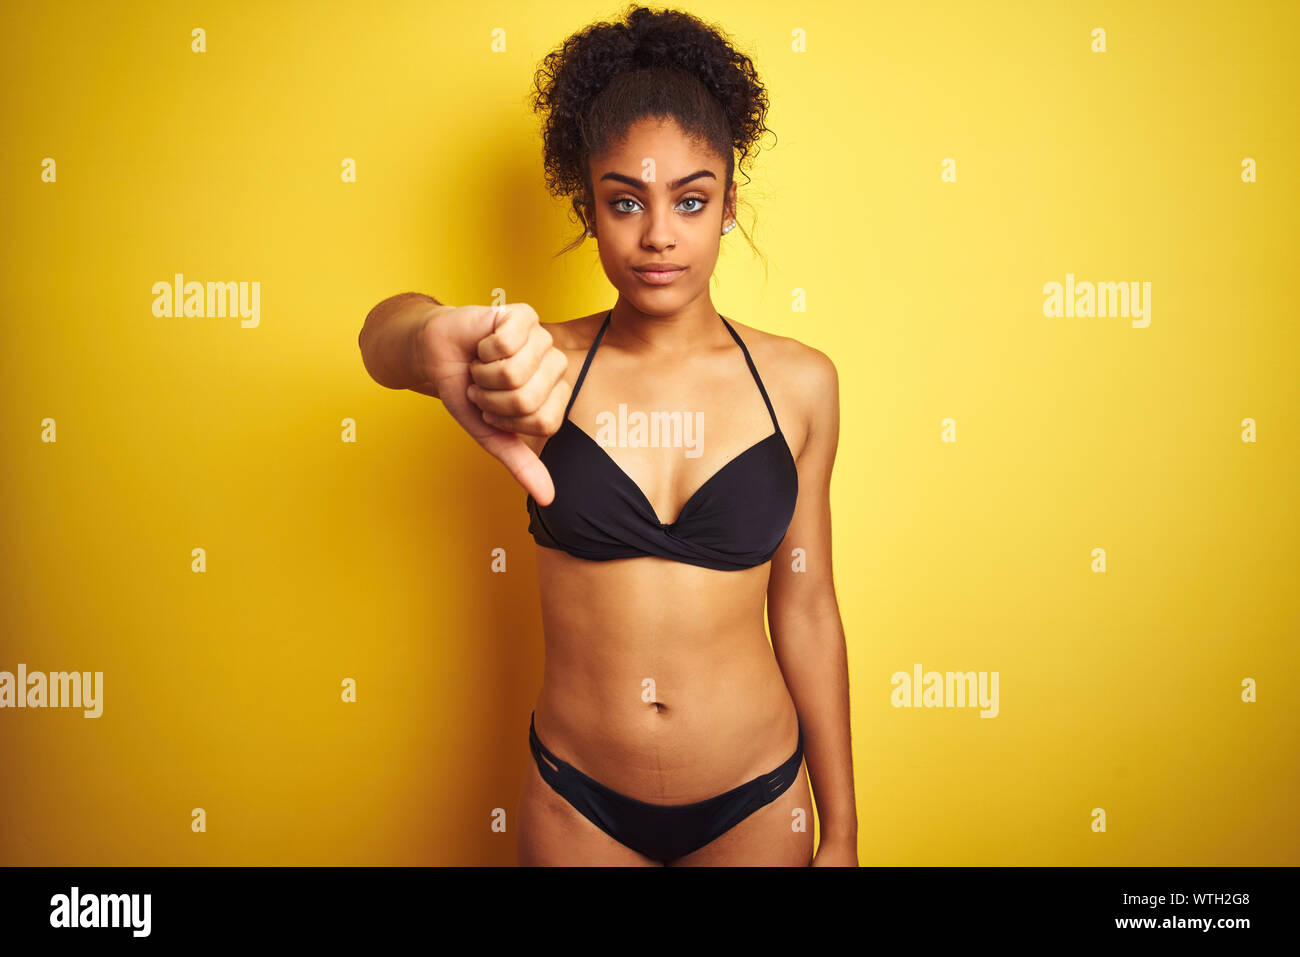 African american woman on vacation wearing bikini standing over isolated  yellow background looking unhappy and angry showing rejection and negative  wi Stock Photo - Alamy